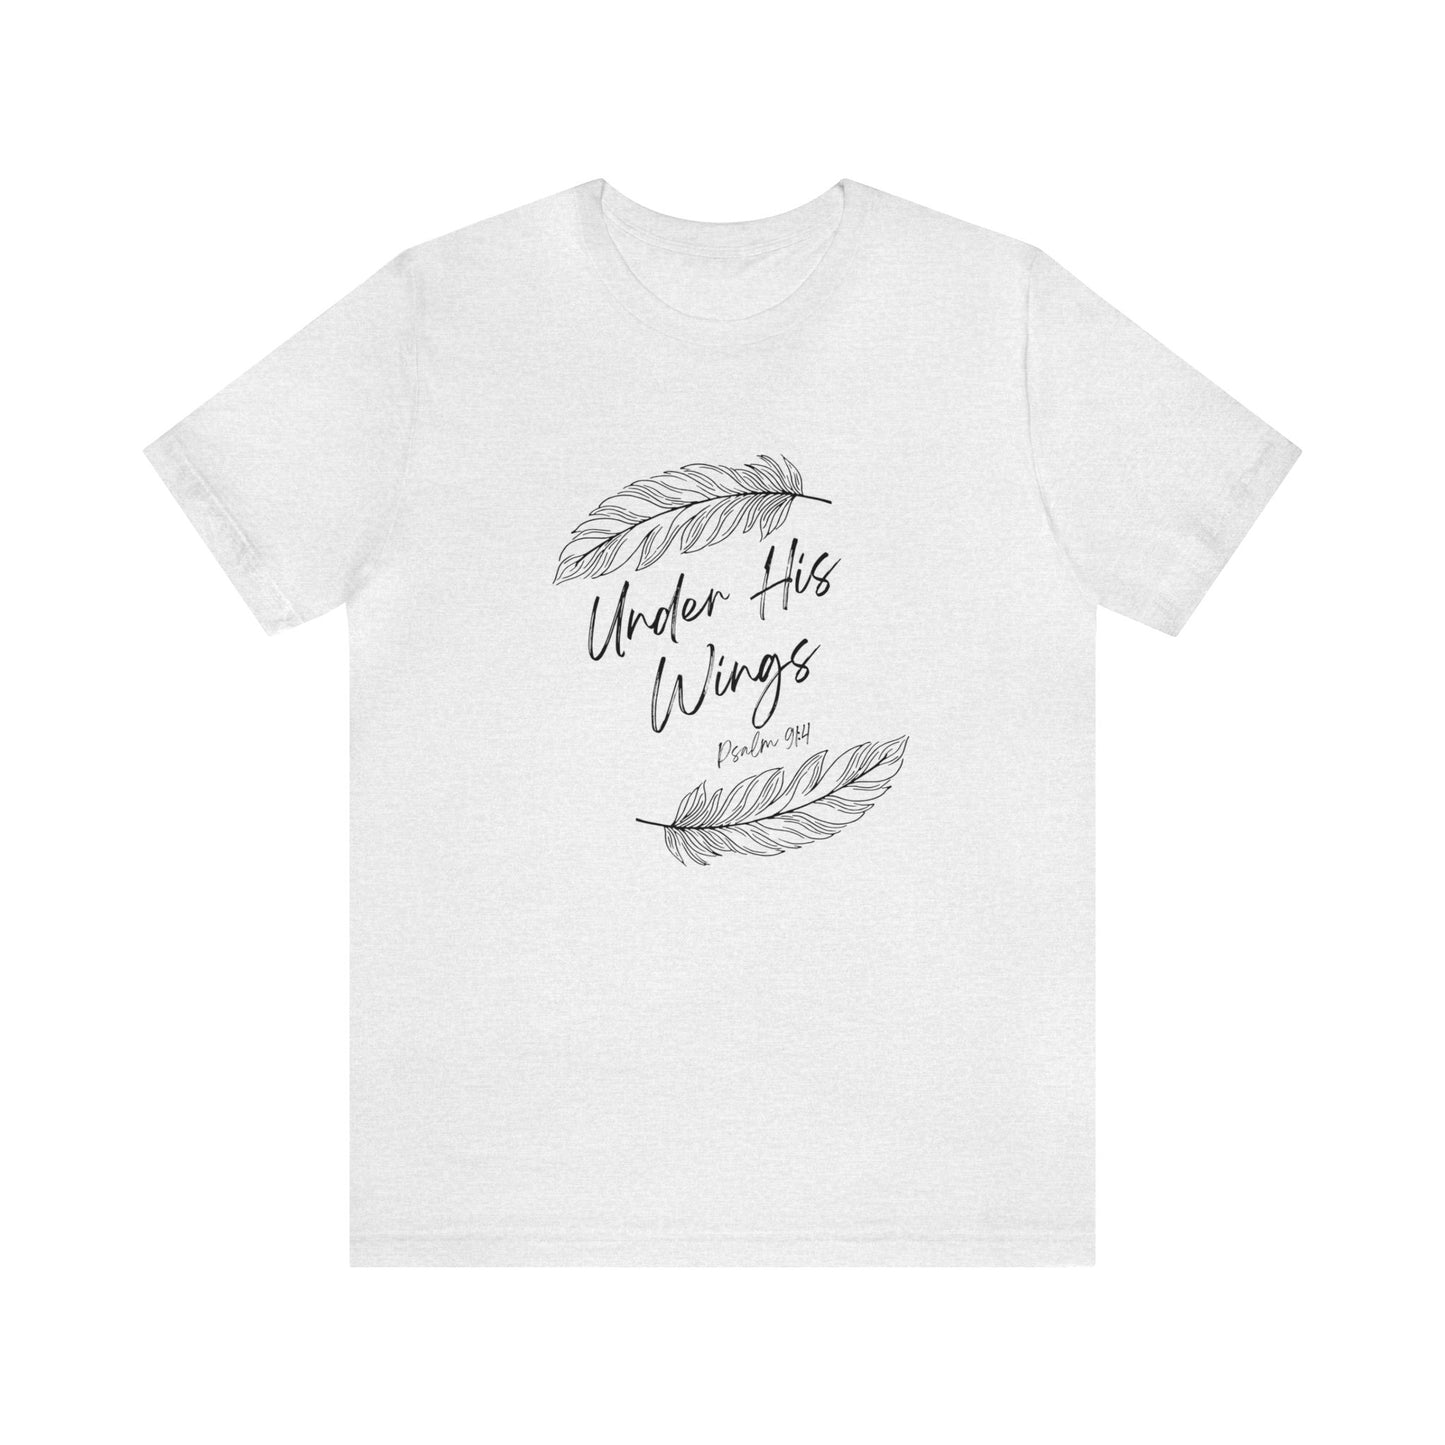 Under His Wings Psalm 91 Jersey Short Sleeve Tee